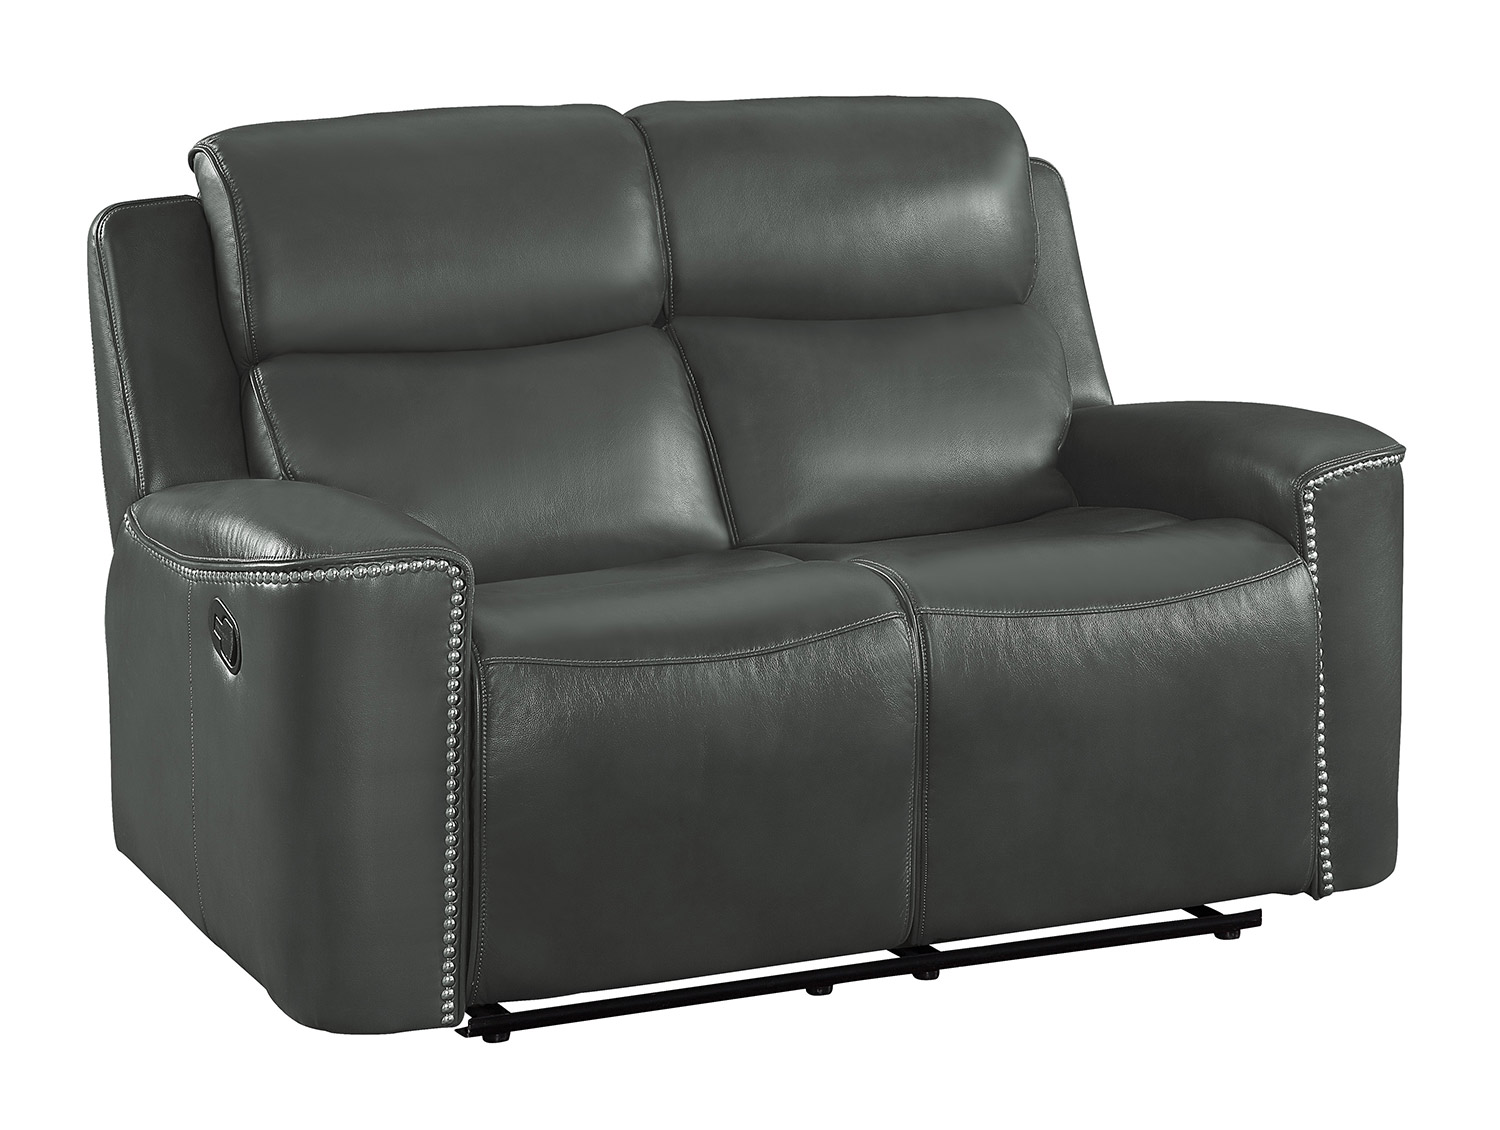 Homelegance Altair Double Reclining Love Seat - Gray